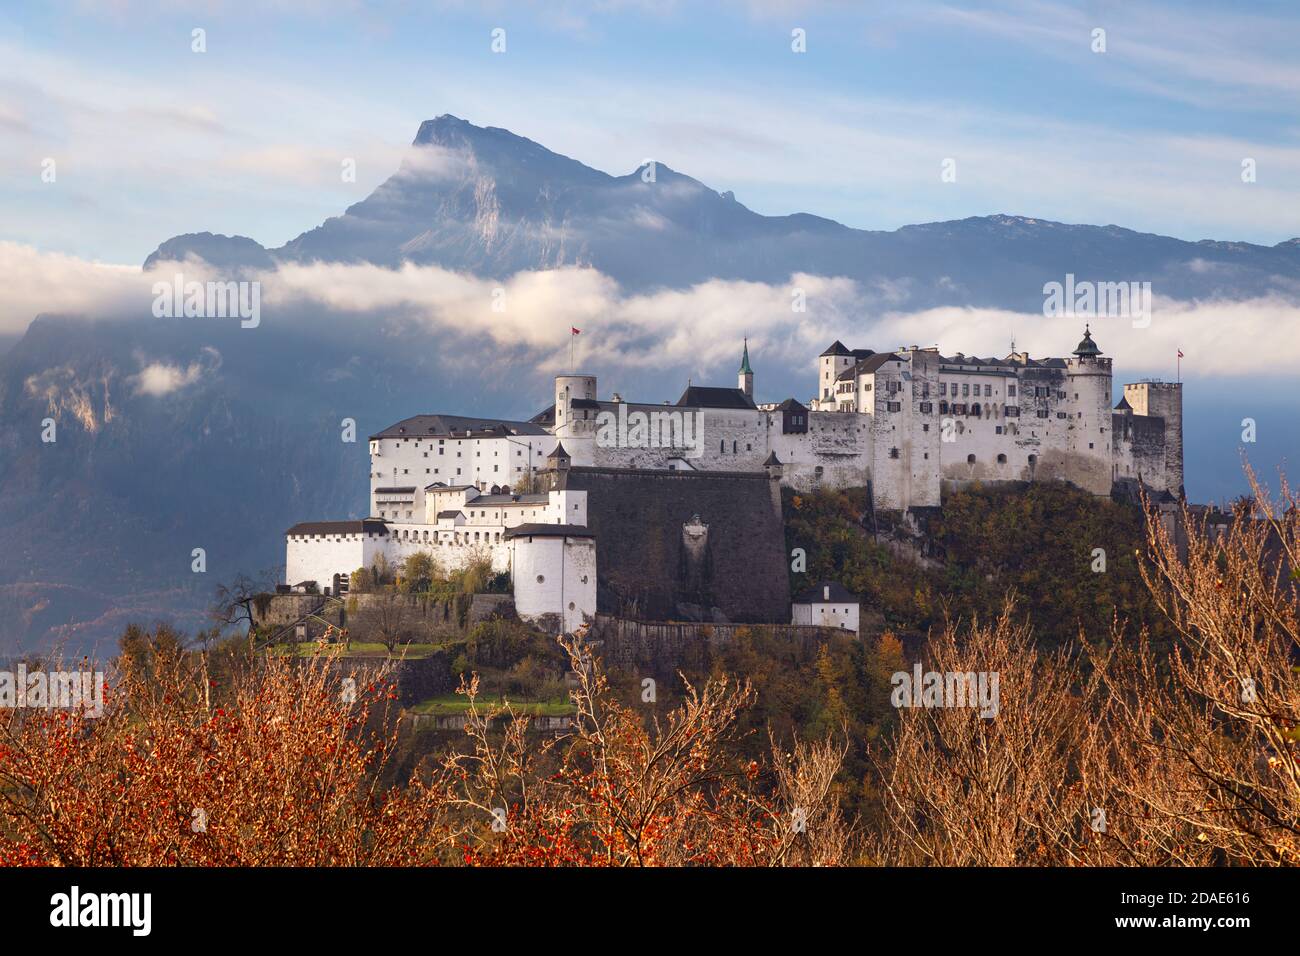 Hohensalzburg Fortress. Image of Hohensalzburg Fortress with mountain range in the background located in Salzburg, Austria at beautiful autumn sunrise Stock Photo